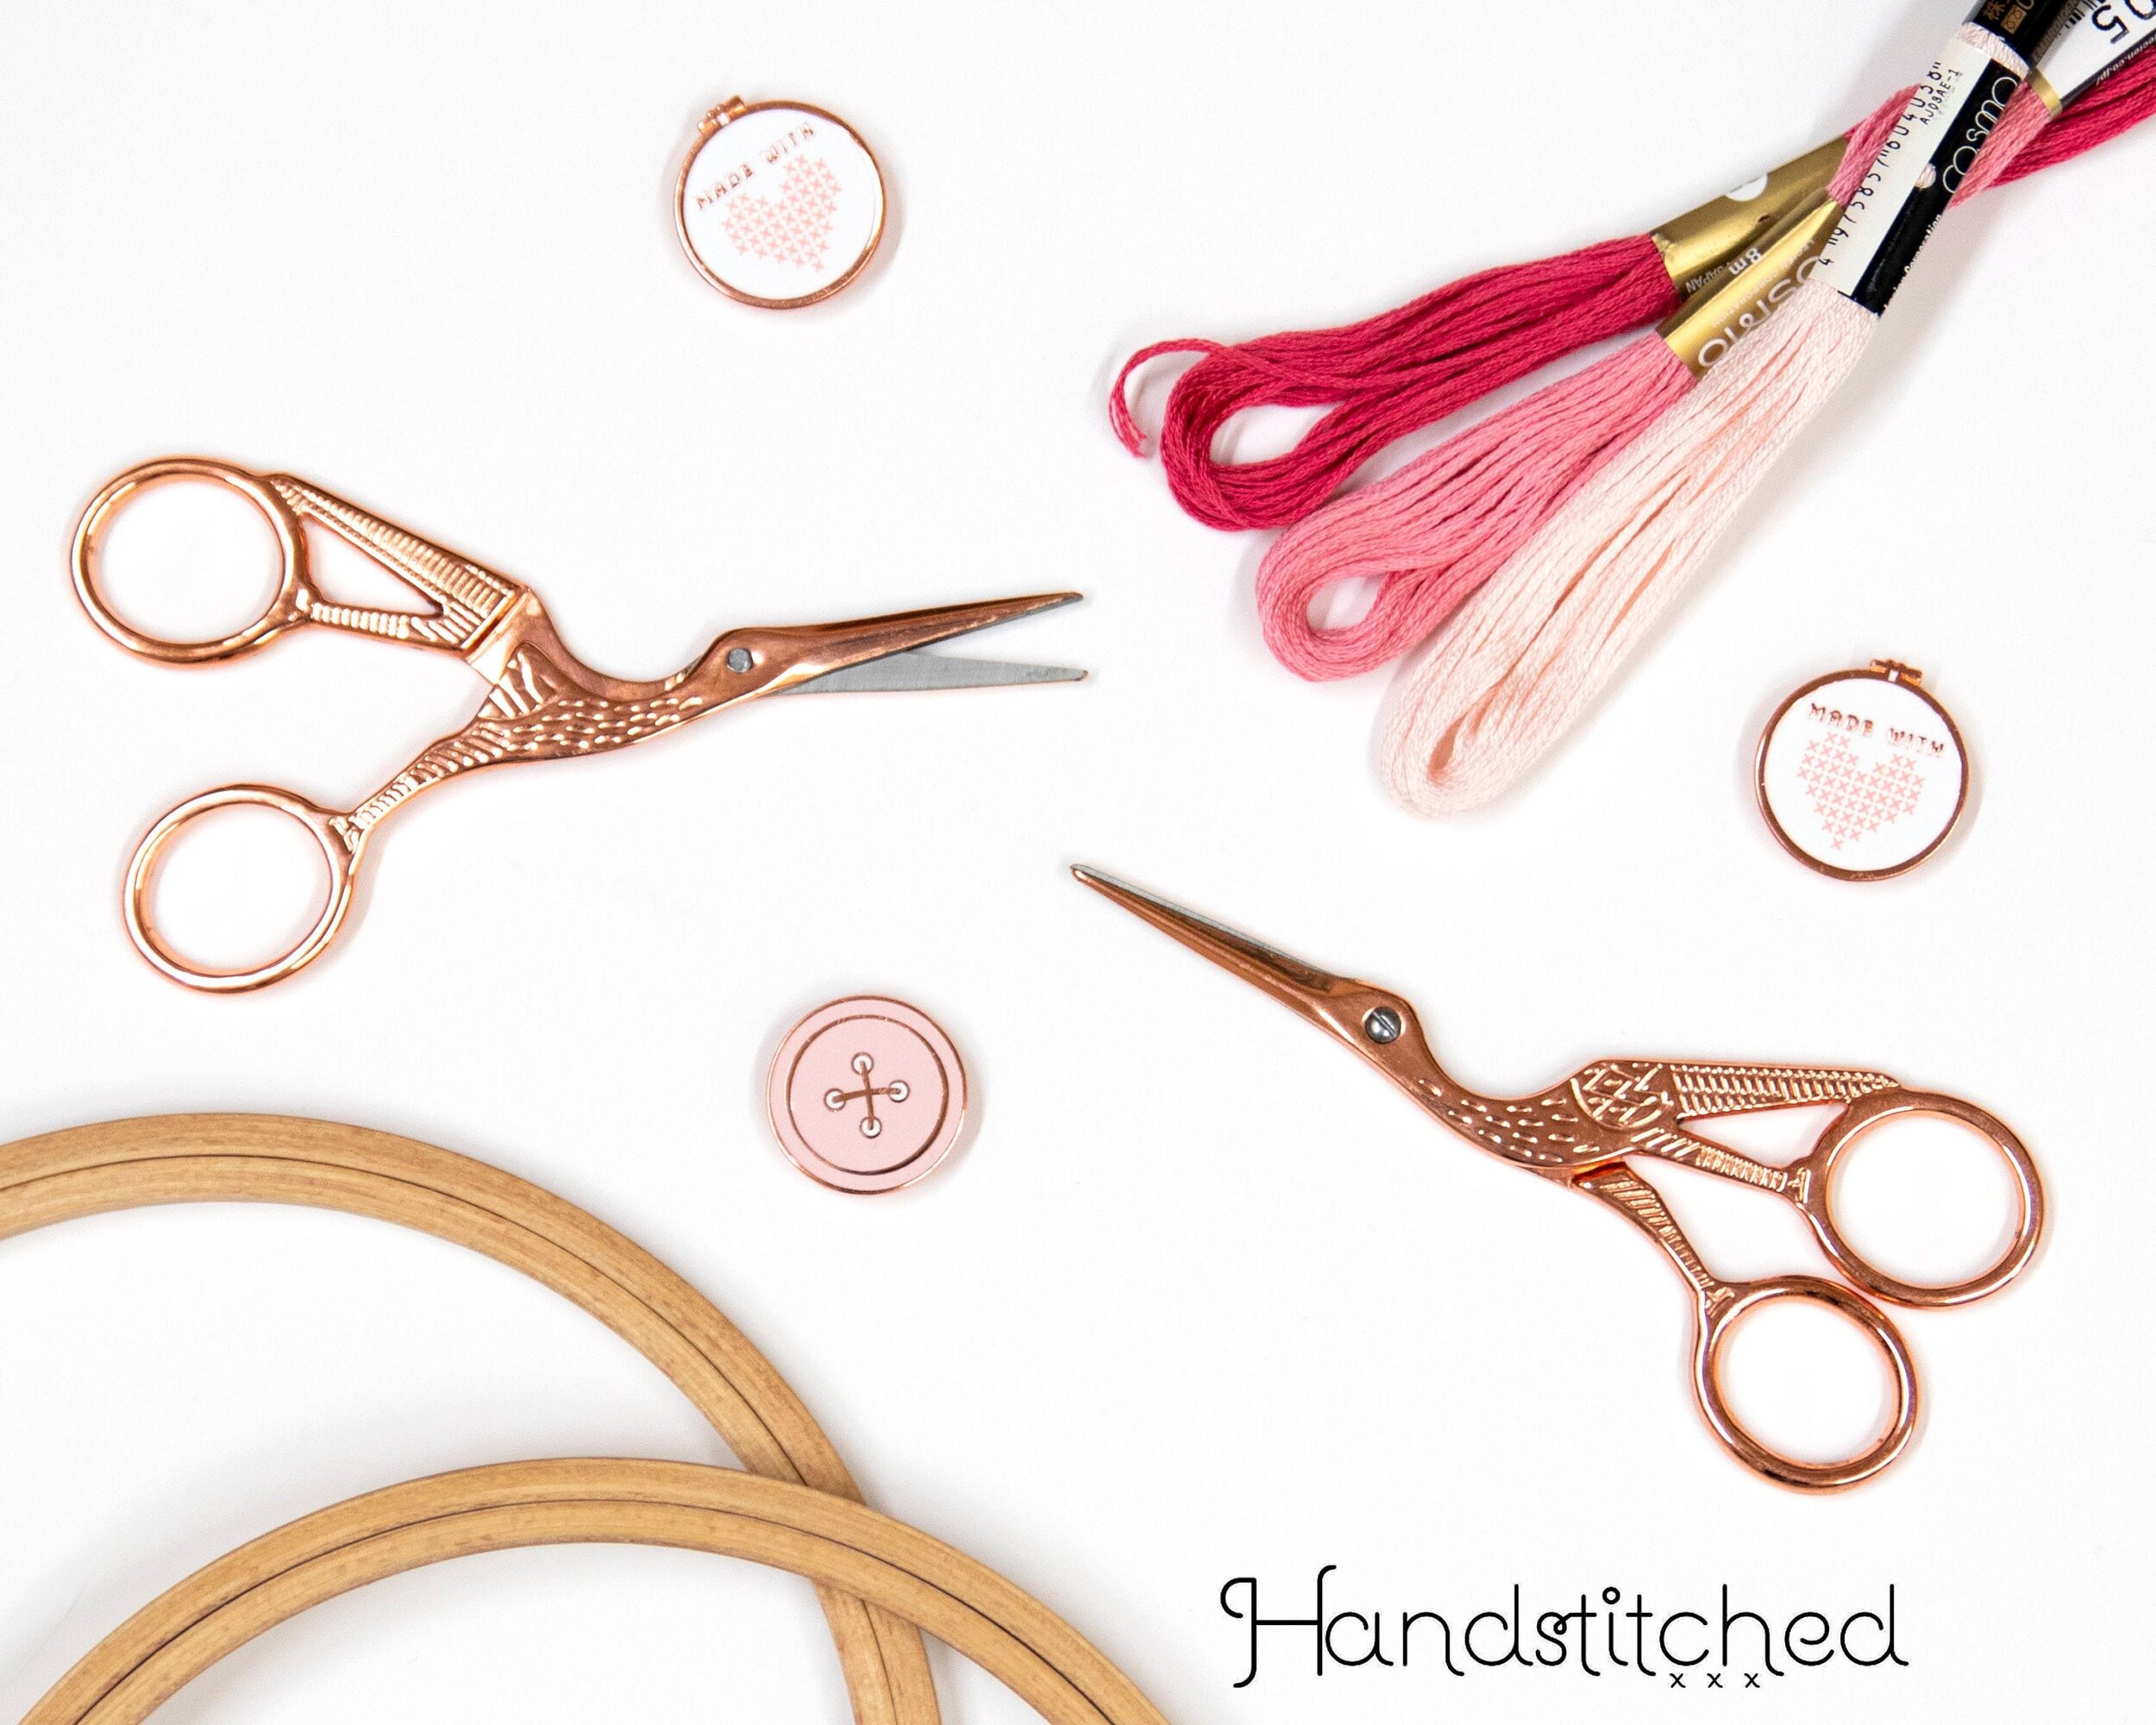 Rose Gold Embroidery Scissors – Little Fabric Shop